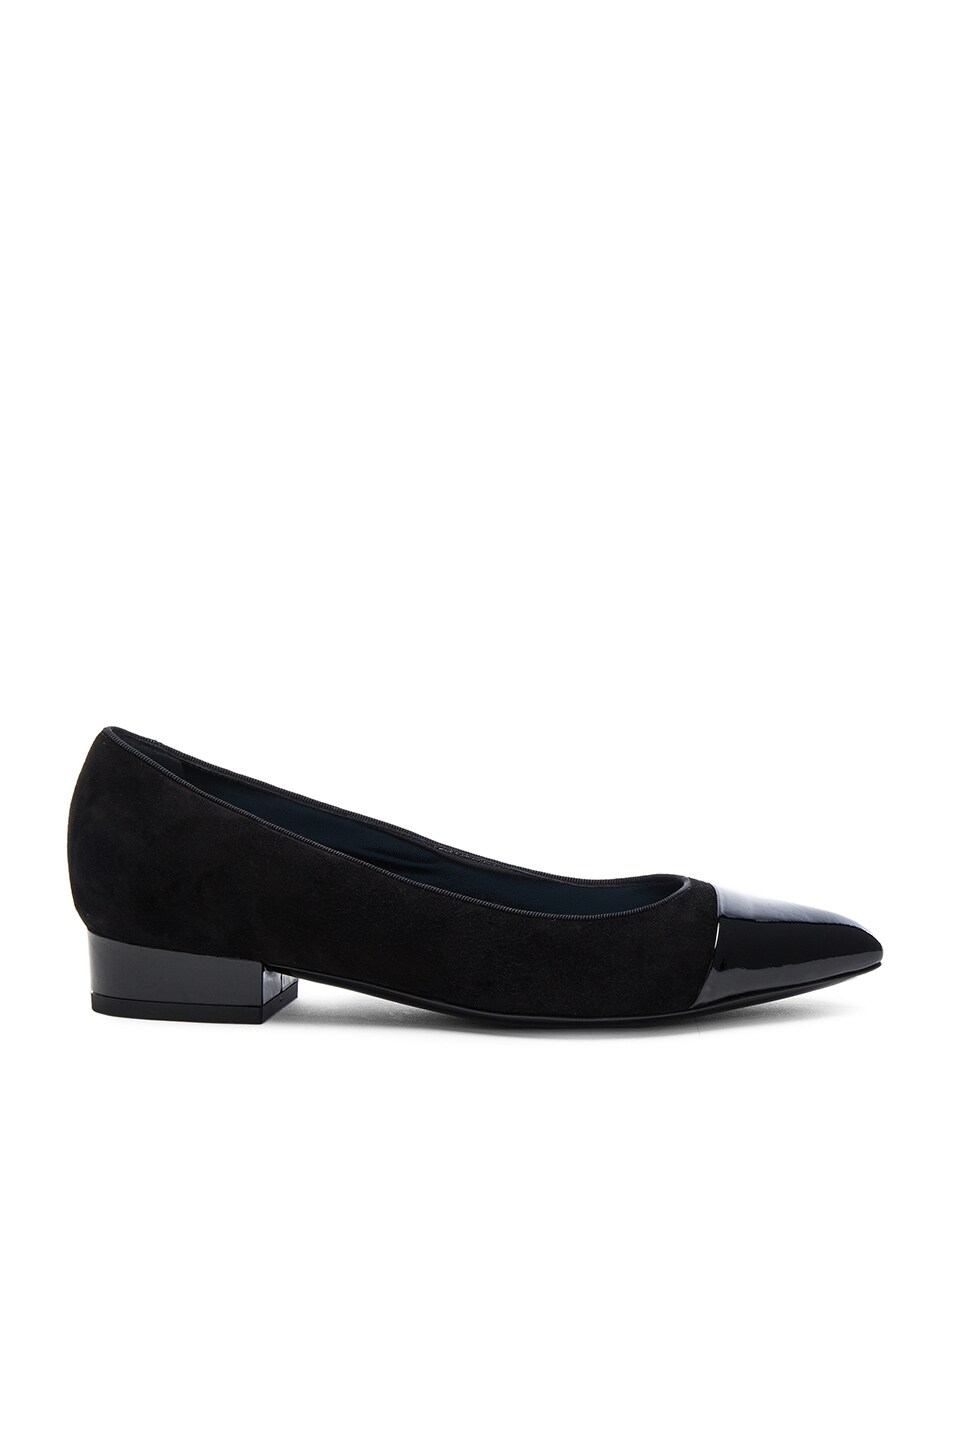 Image 1 of Lanvin Suede Pointy Ballerina Flats in Black